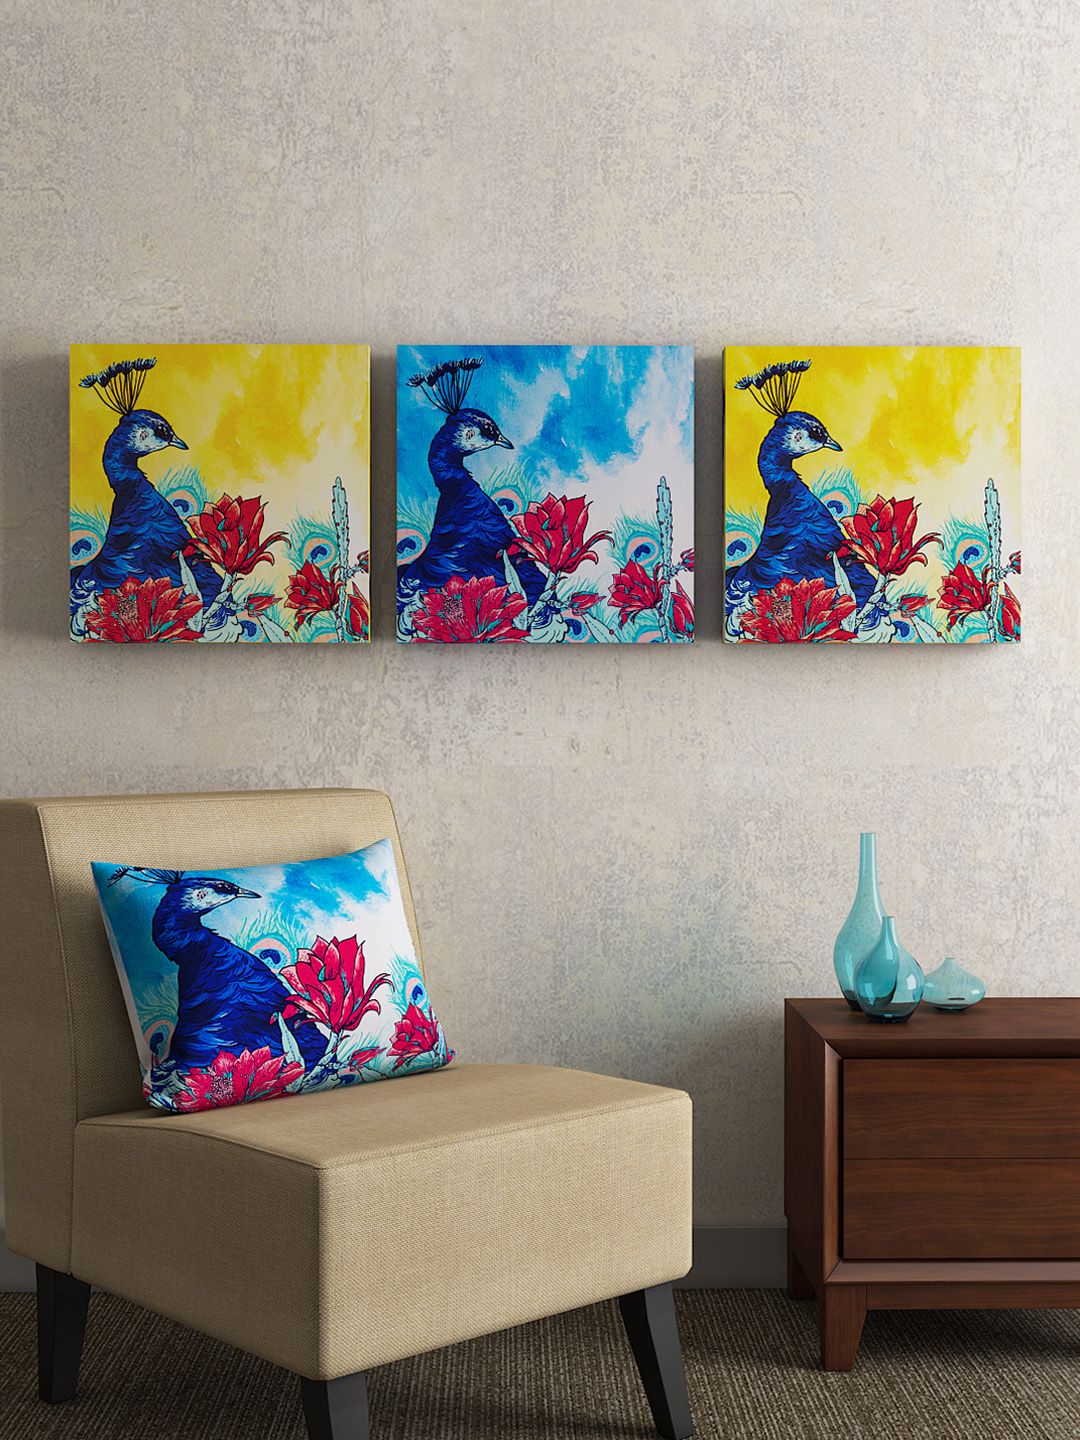 SEJ by Nisha Gupta Set of 3 Multicolored Framed Wall Painting Price in India